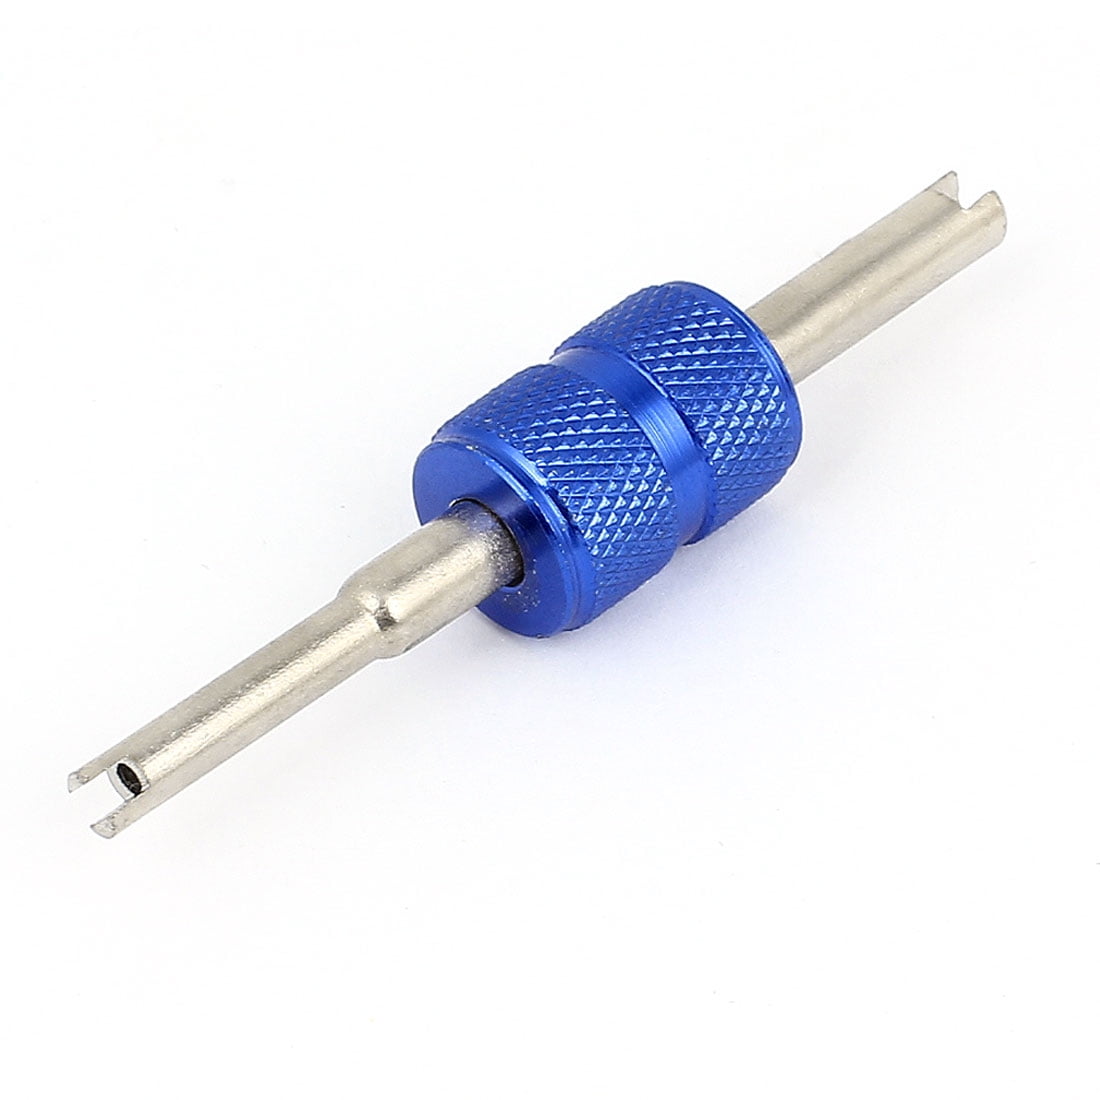 Details about   2 Ways Hand Wrench Tire Tyre Valve Stem Core Remover Key Tool A/C and Auto C BJ 